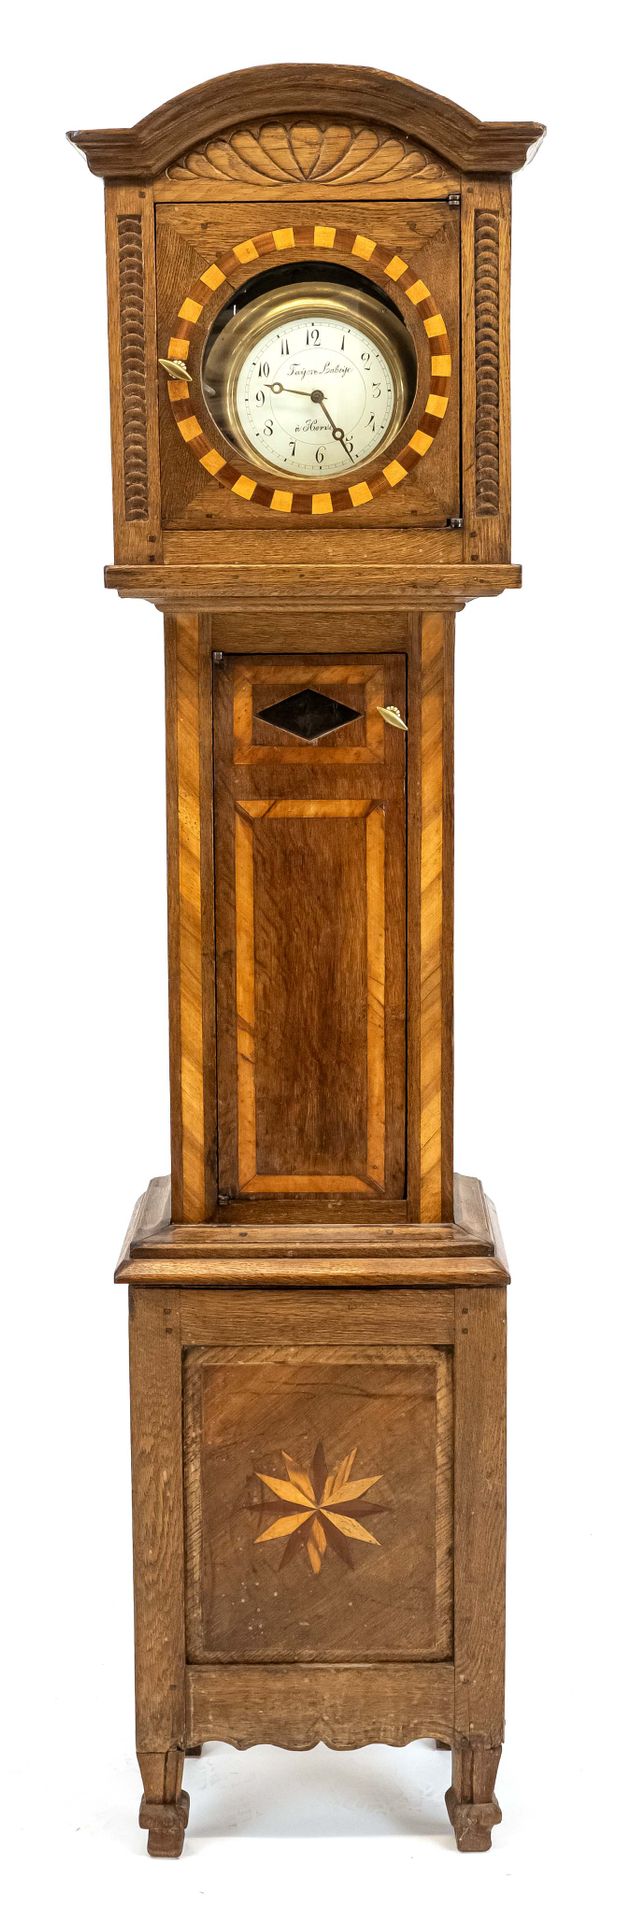 Null Grandfather clock oak mid-19th century, with colored wood inlays, carved he&hellip;